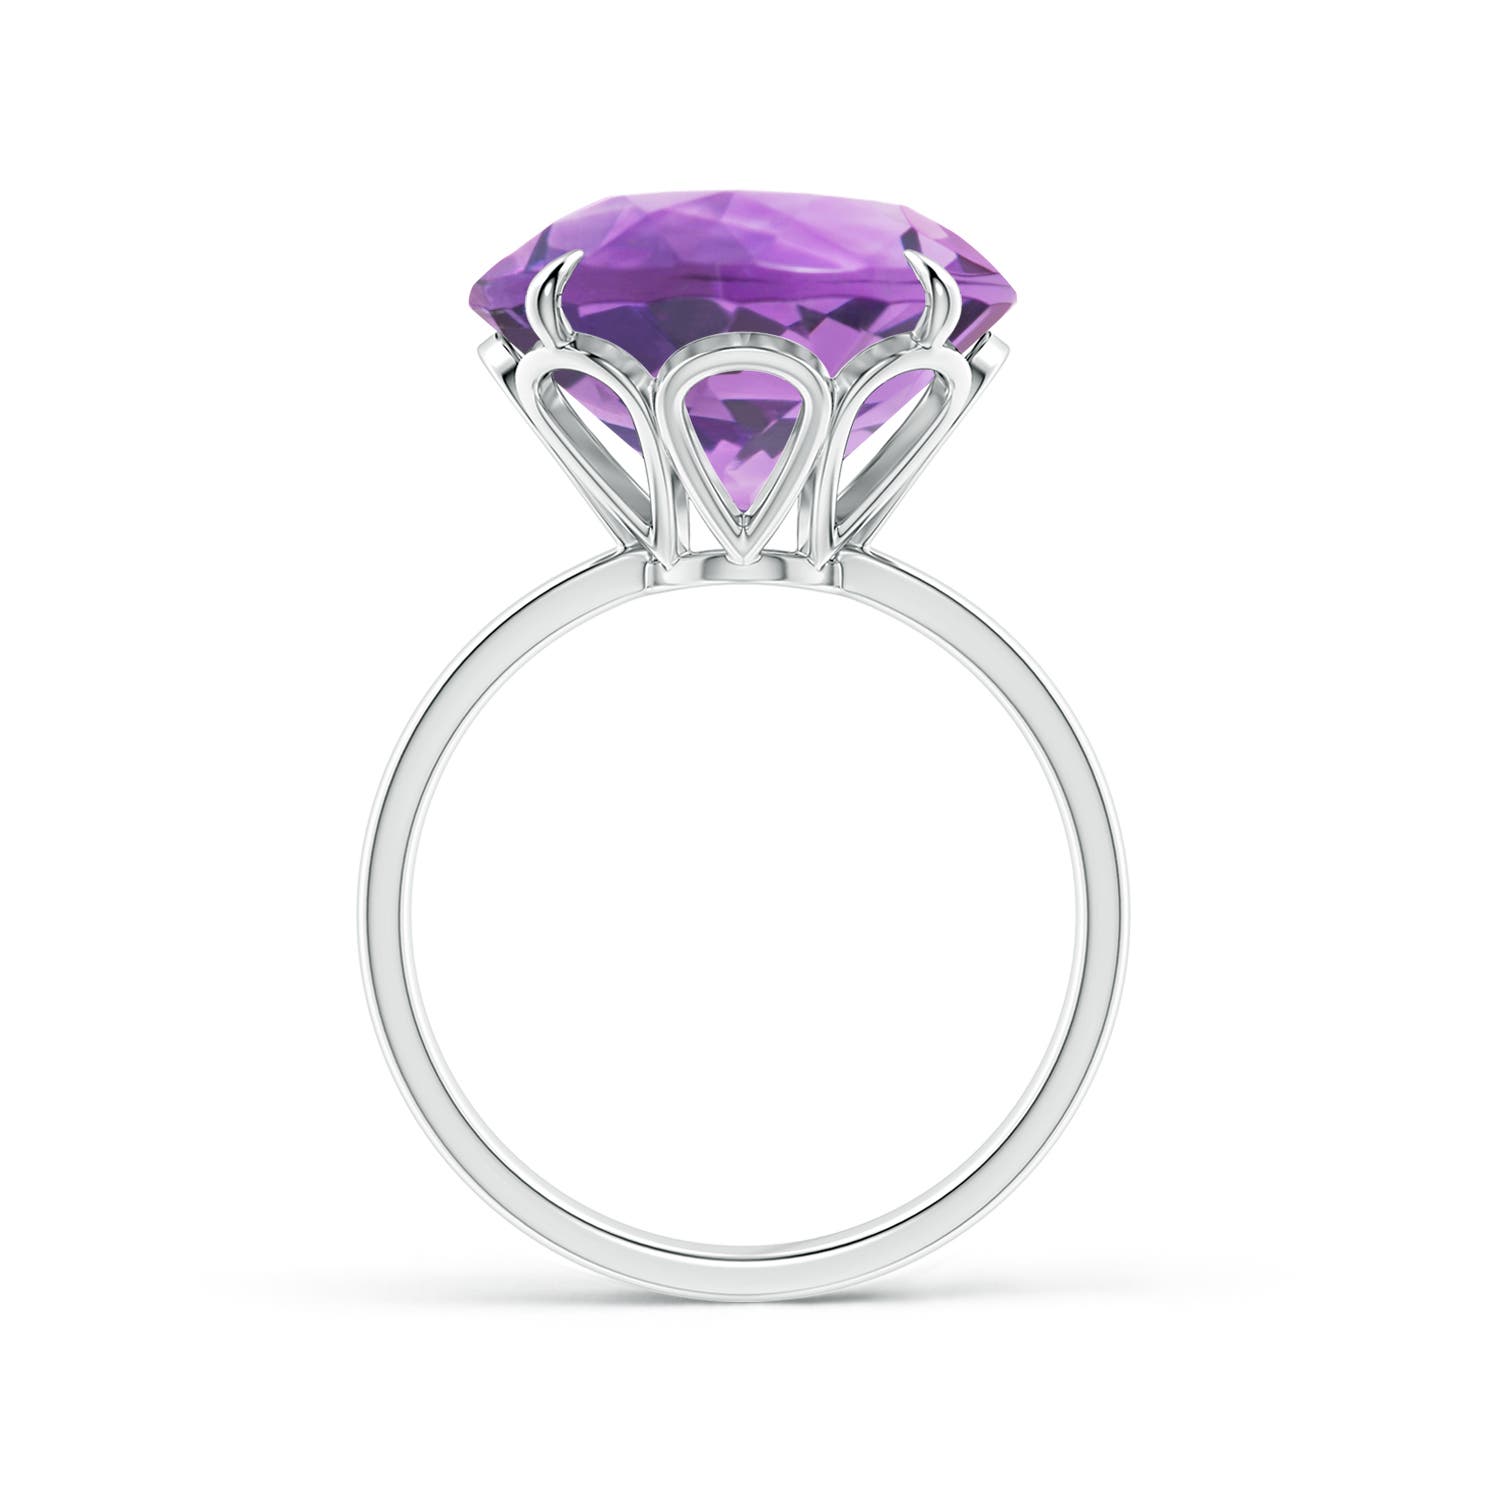 A- Amethyst / 8.5 CT / 14 KT White Gold